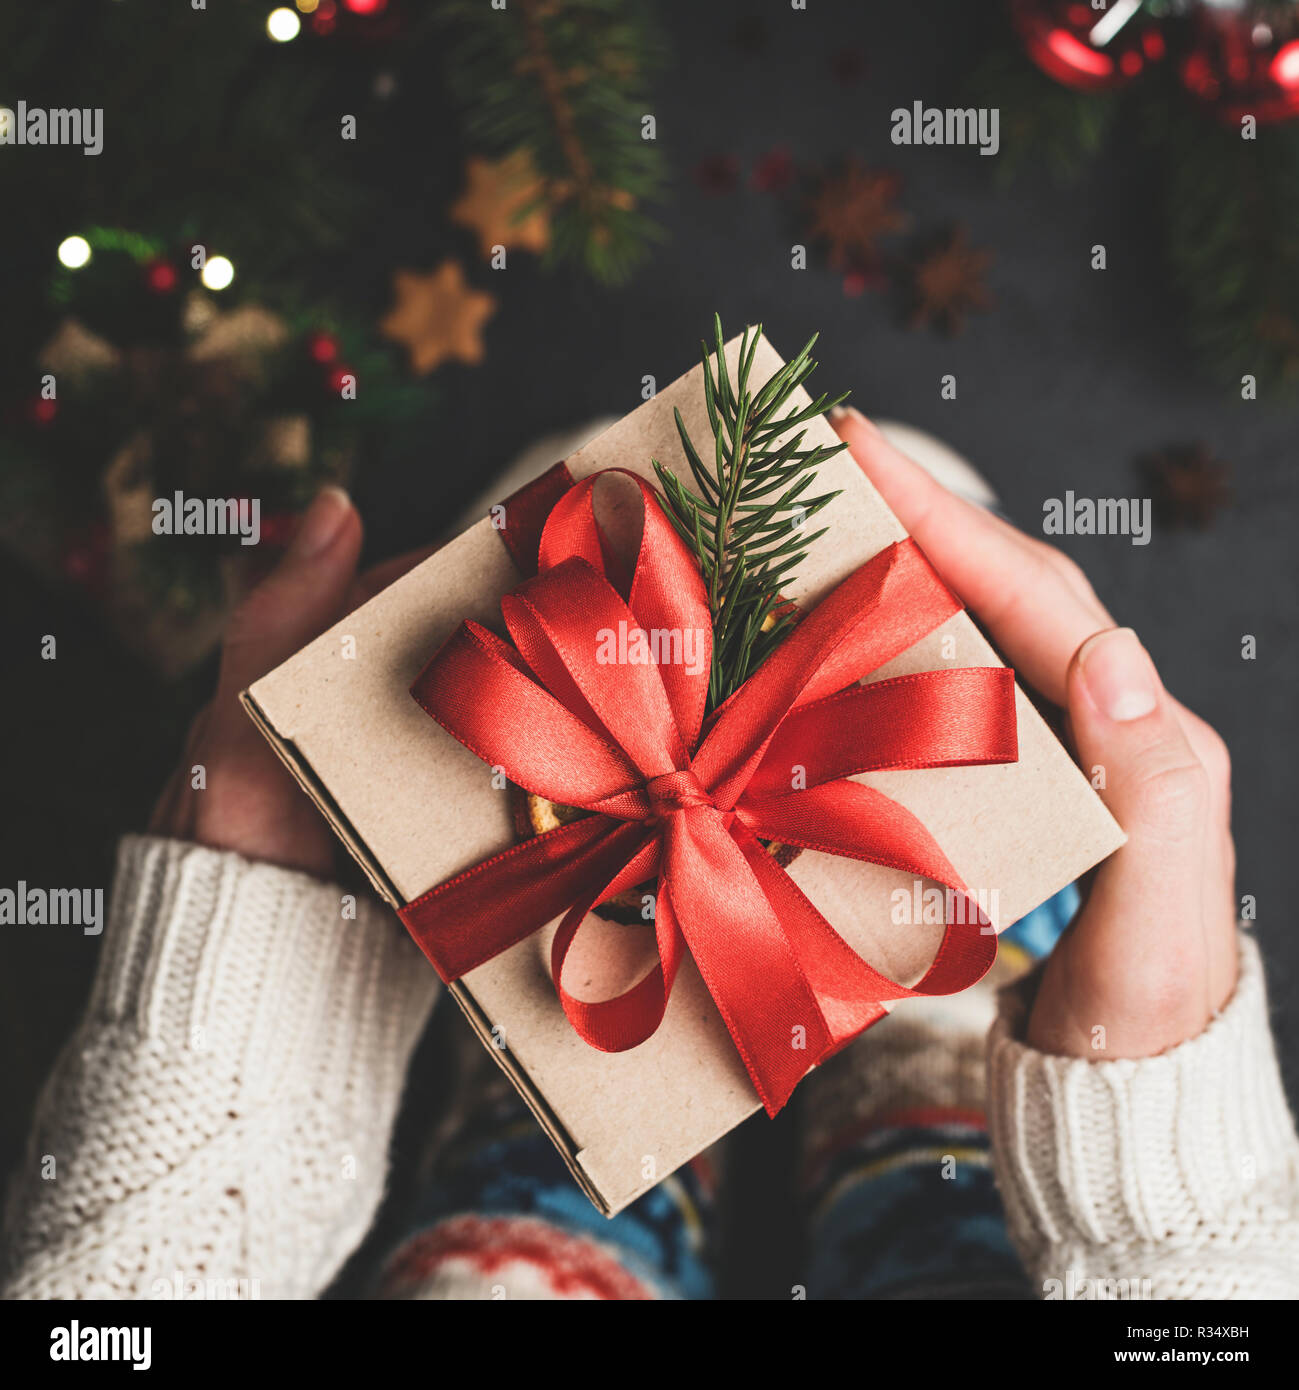 Christmas Gift Box With Red Lace In Hands. Craft Paper Gift Box Package. Hands Holding Christmas or New Year Present Stock Photo